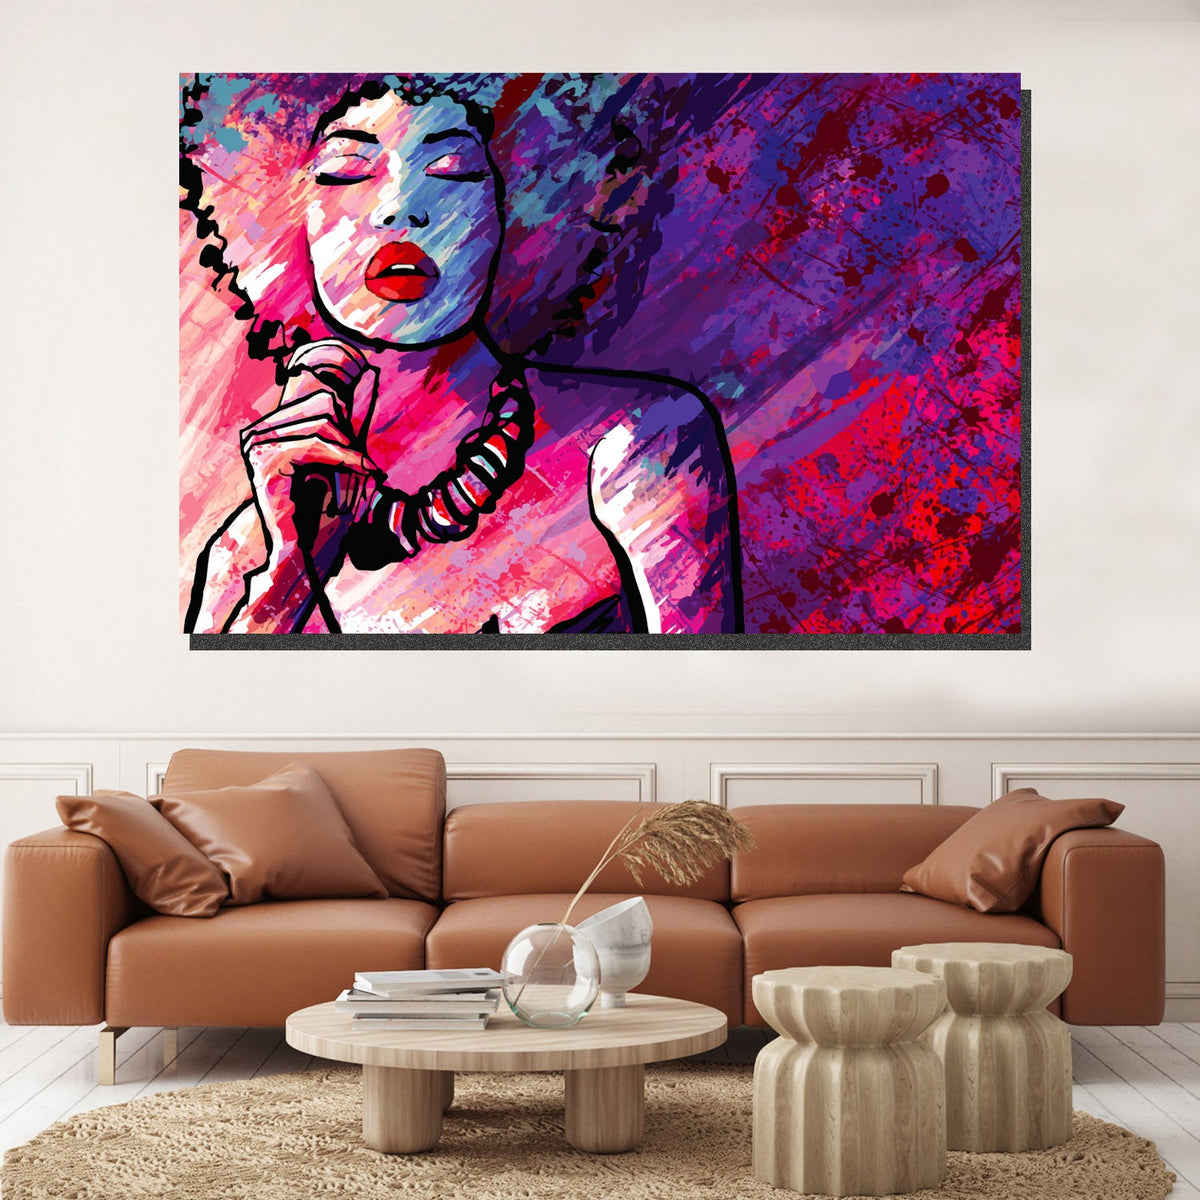 https://cdn.shopify.com/s/files/1/0387/9986/8044/products/JazzSingerCanvasArtprintStretched-2.jpg